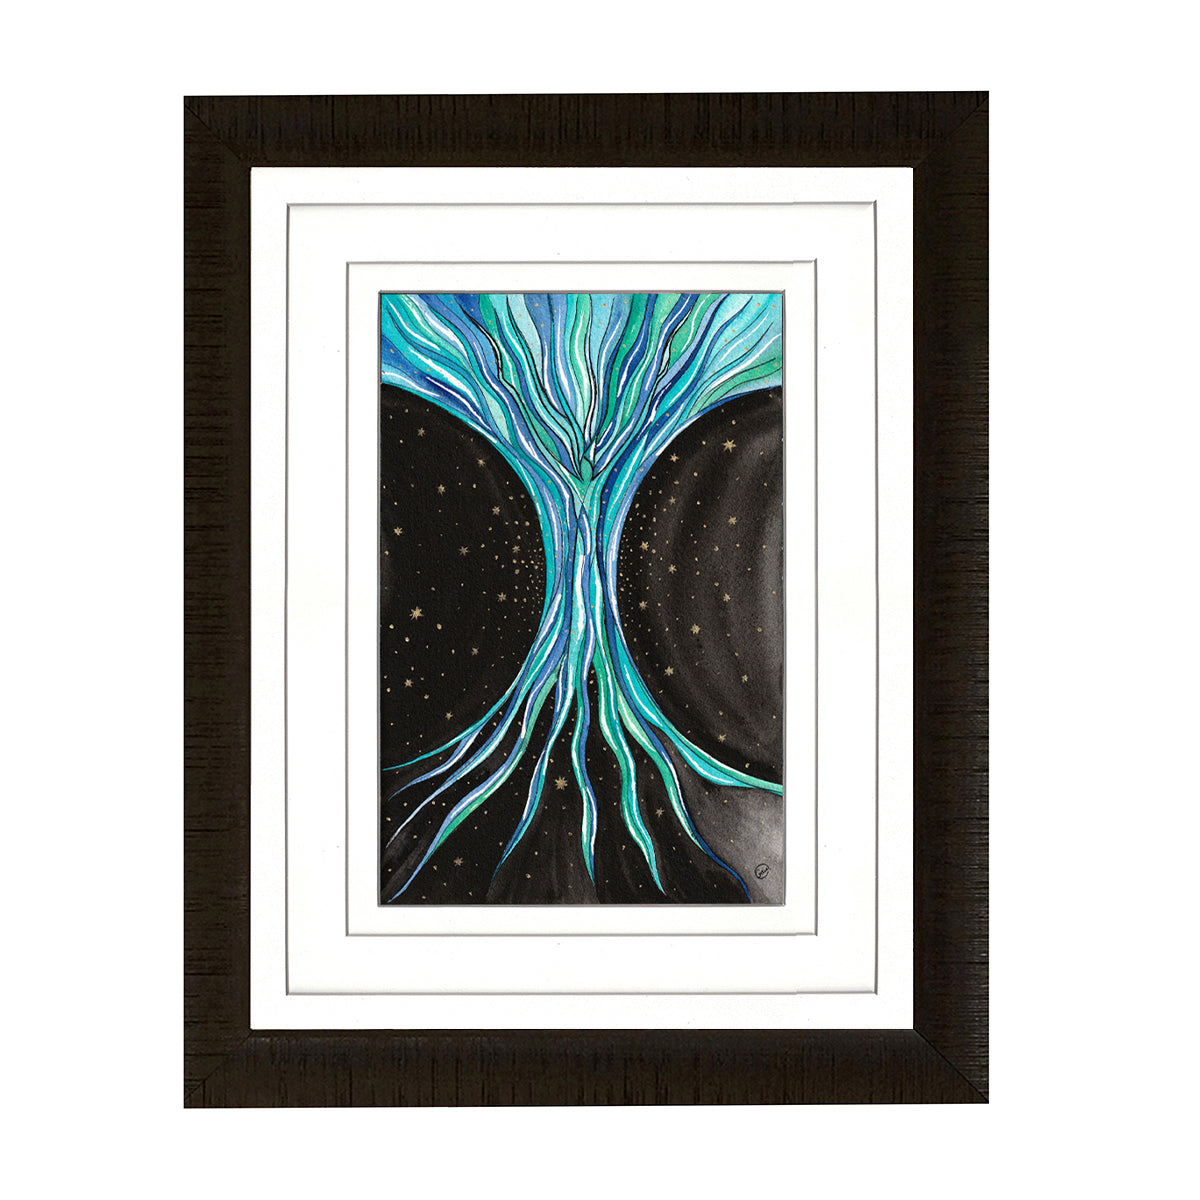 Framed artwork the image is blue and black with some gold stars it is called the river of life